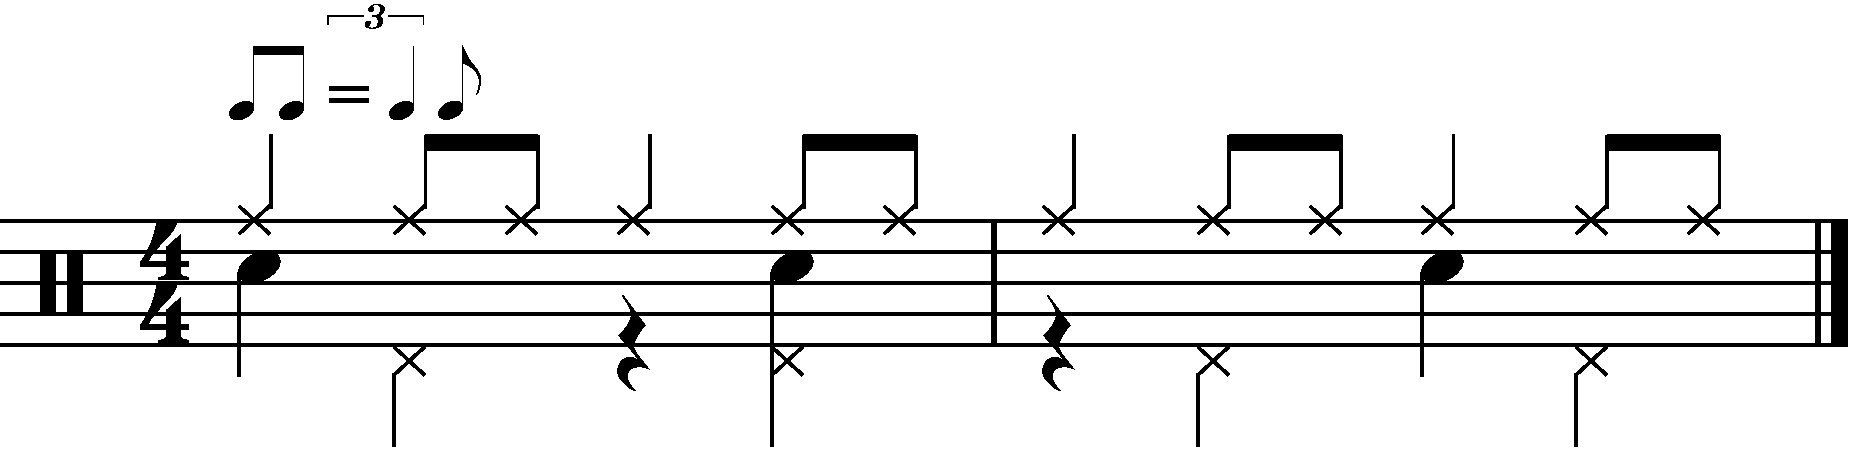 A basic jazz groove using quarter note snares